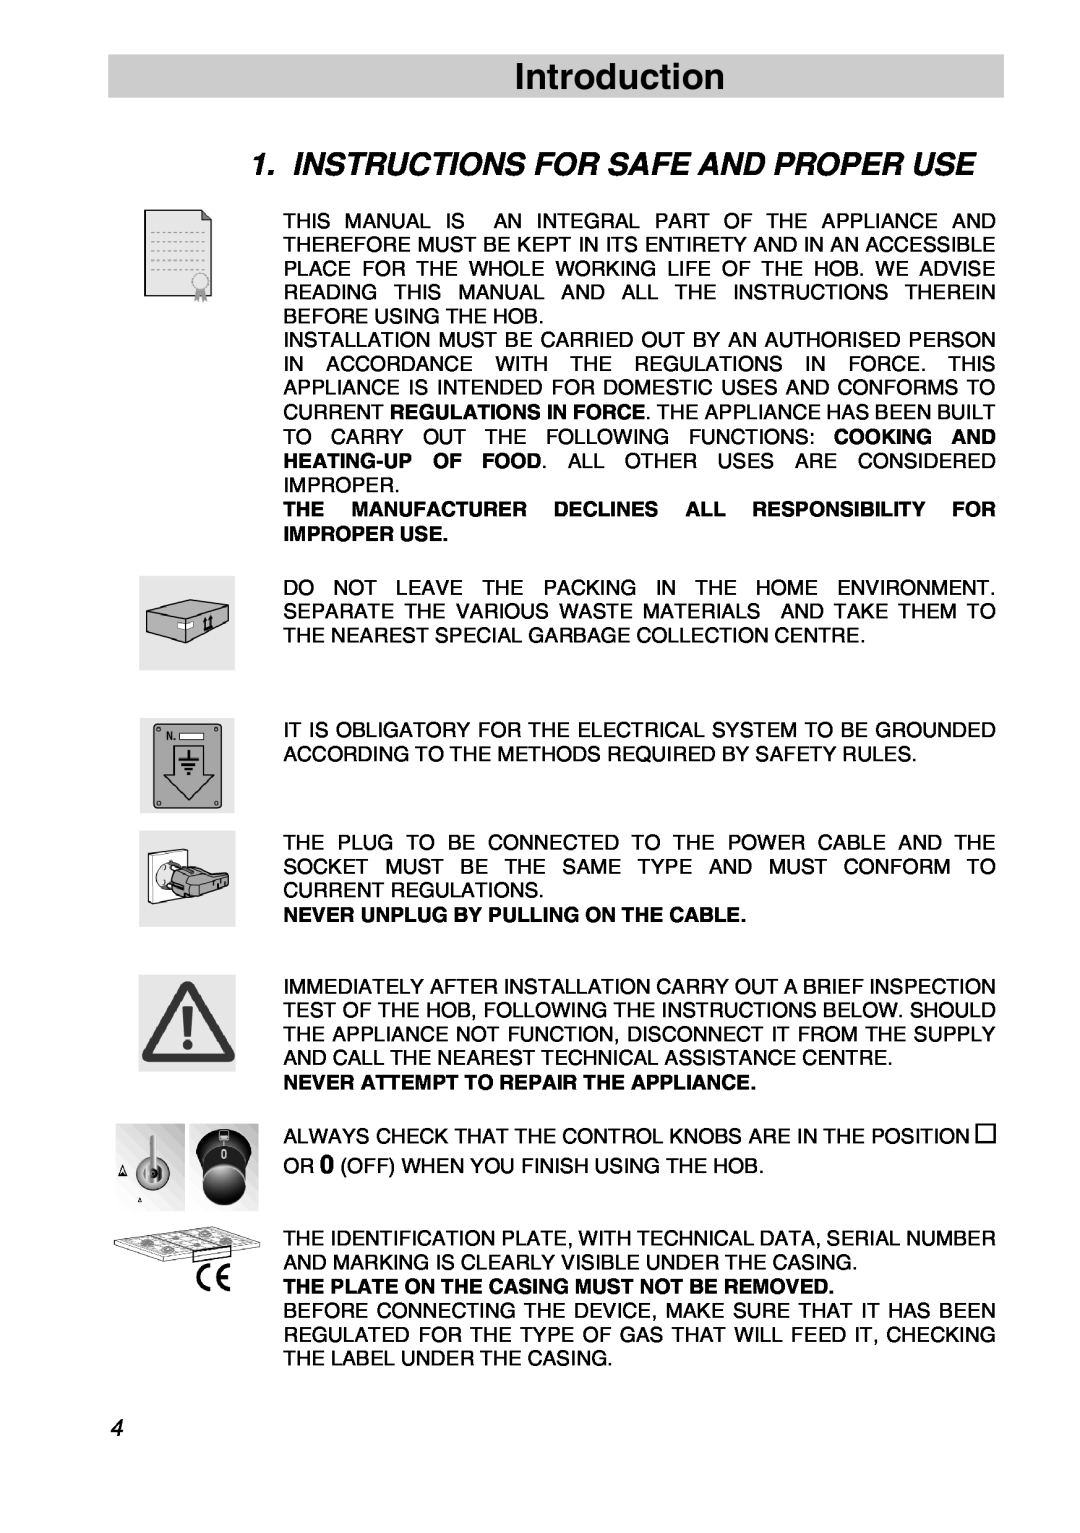 Smeg PVA96 manual Introduction, Instructions For Safe And Proper Use, Never Unplug By Pulling On The Cable 